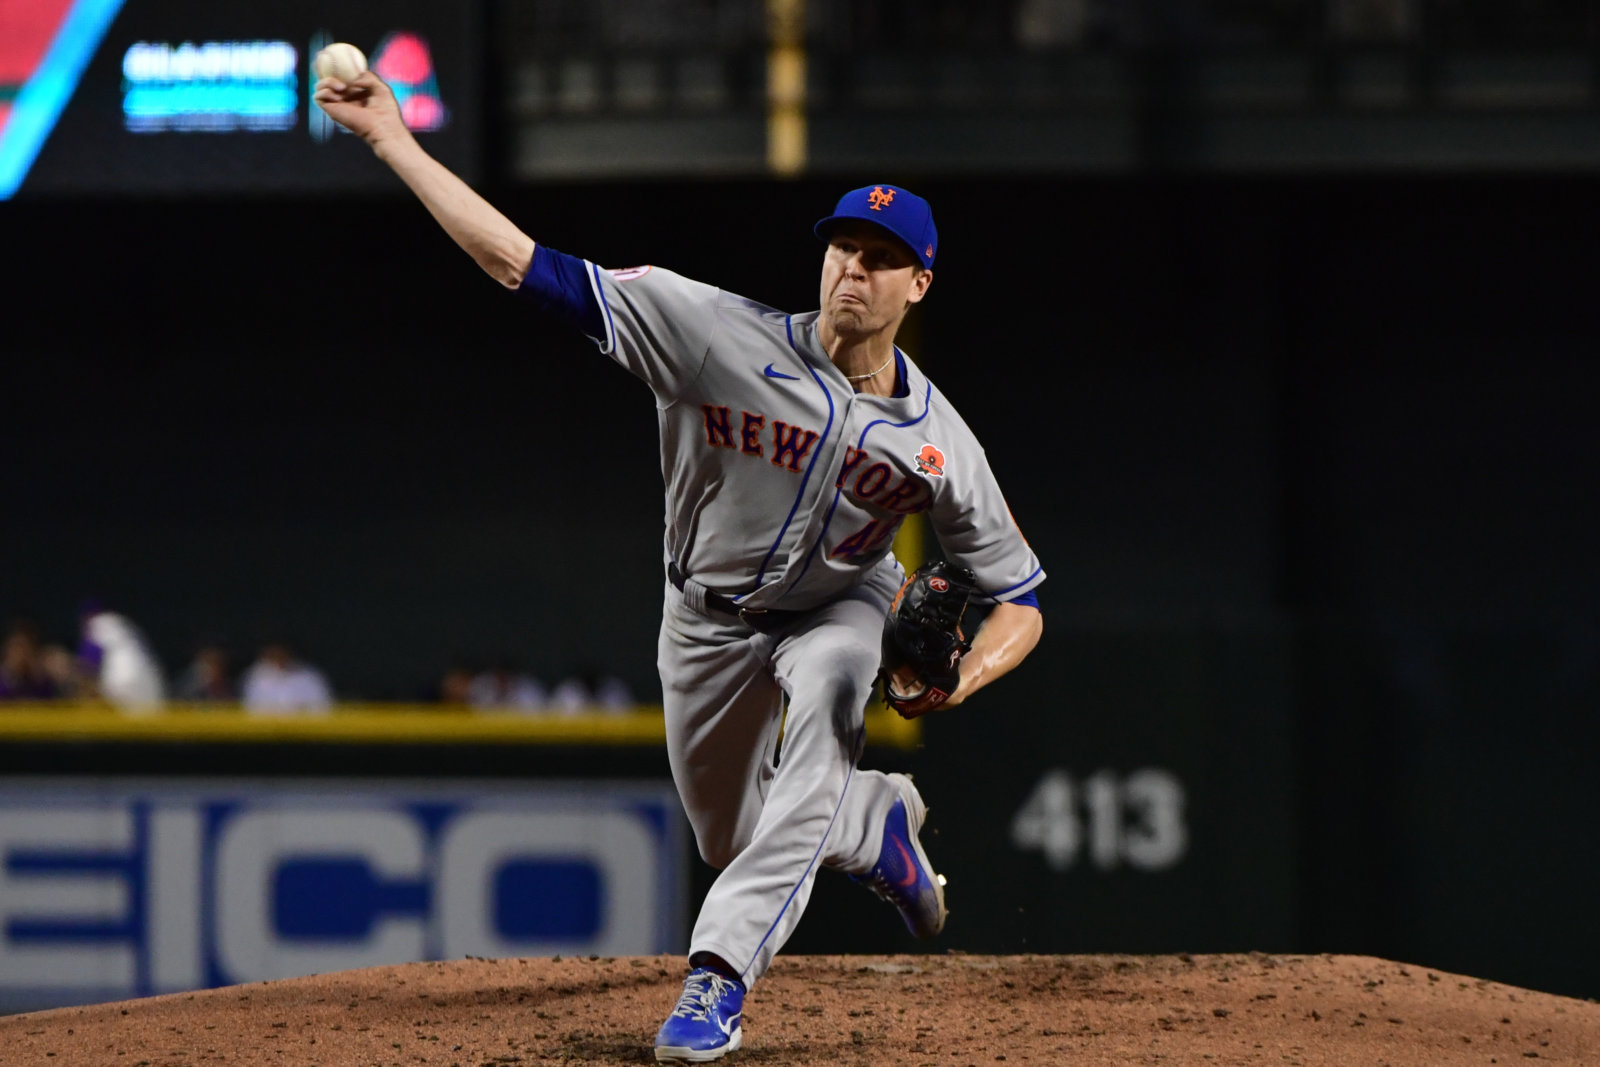 Shackles set to come off for Mets ace Jacob deGrom as he challenges